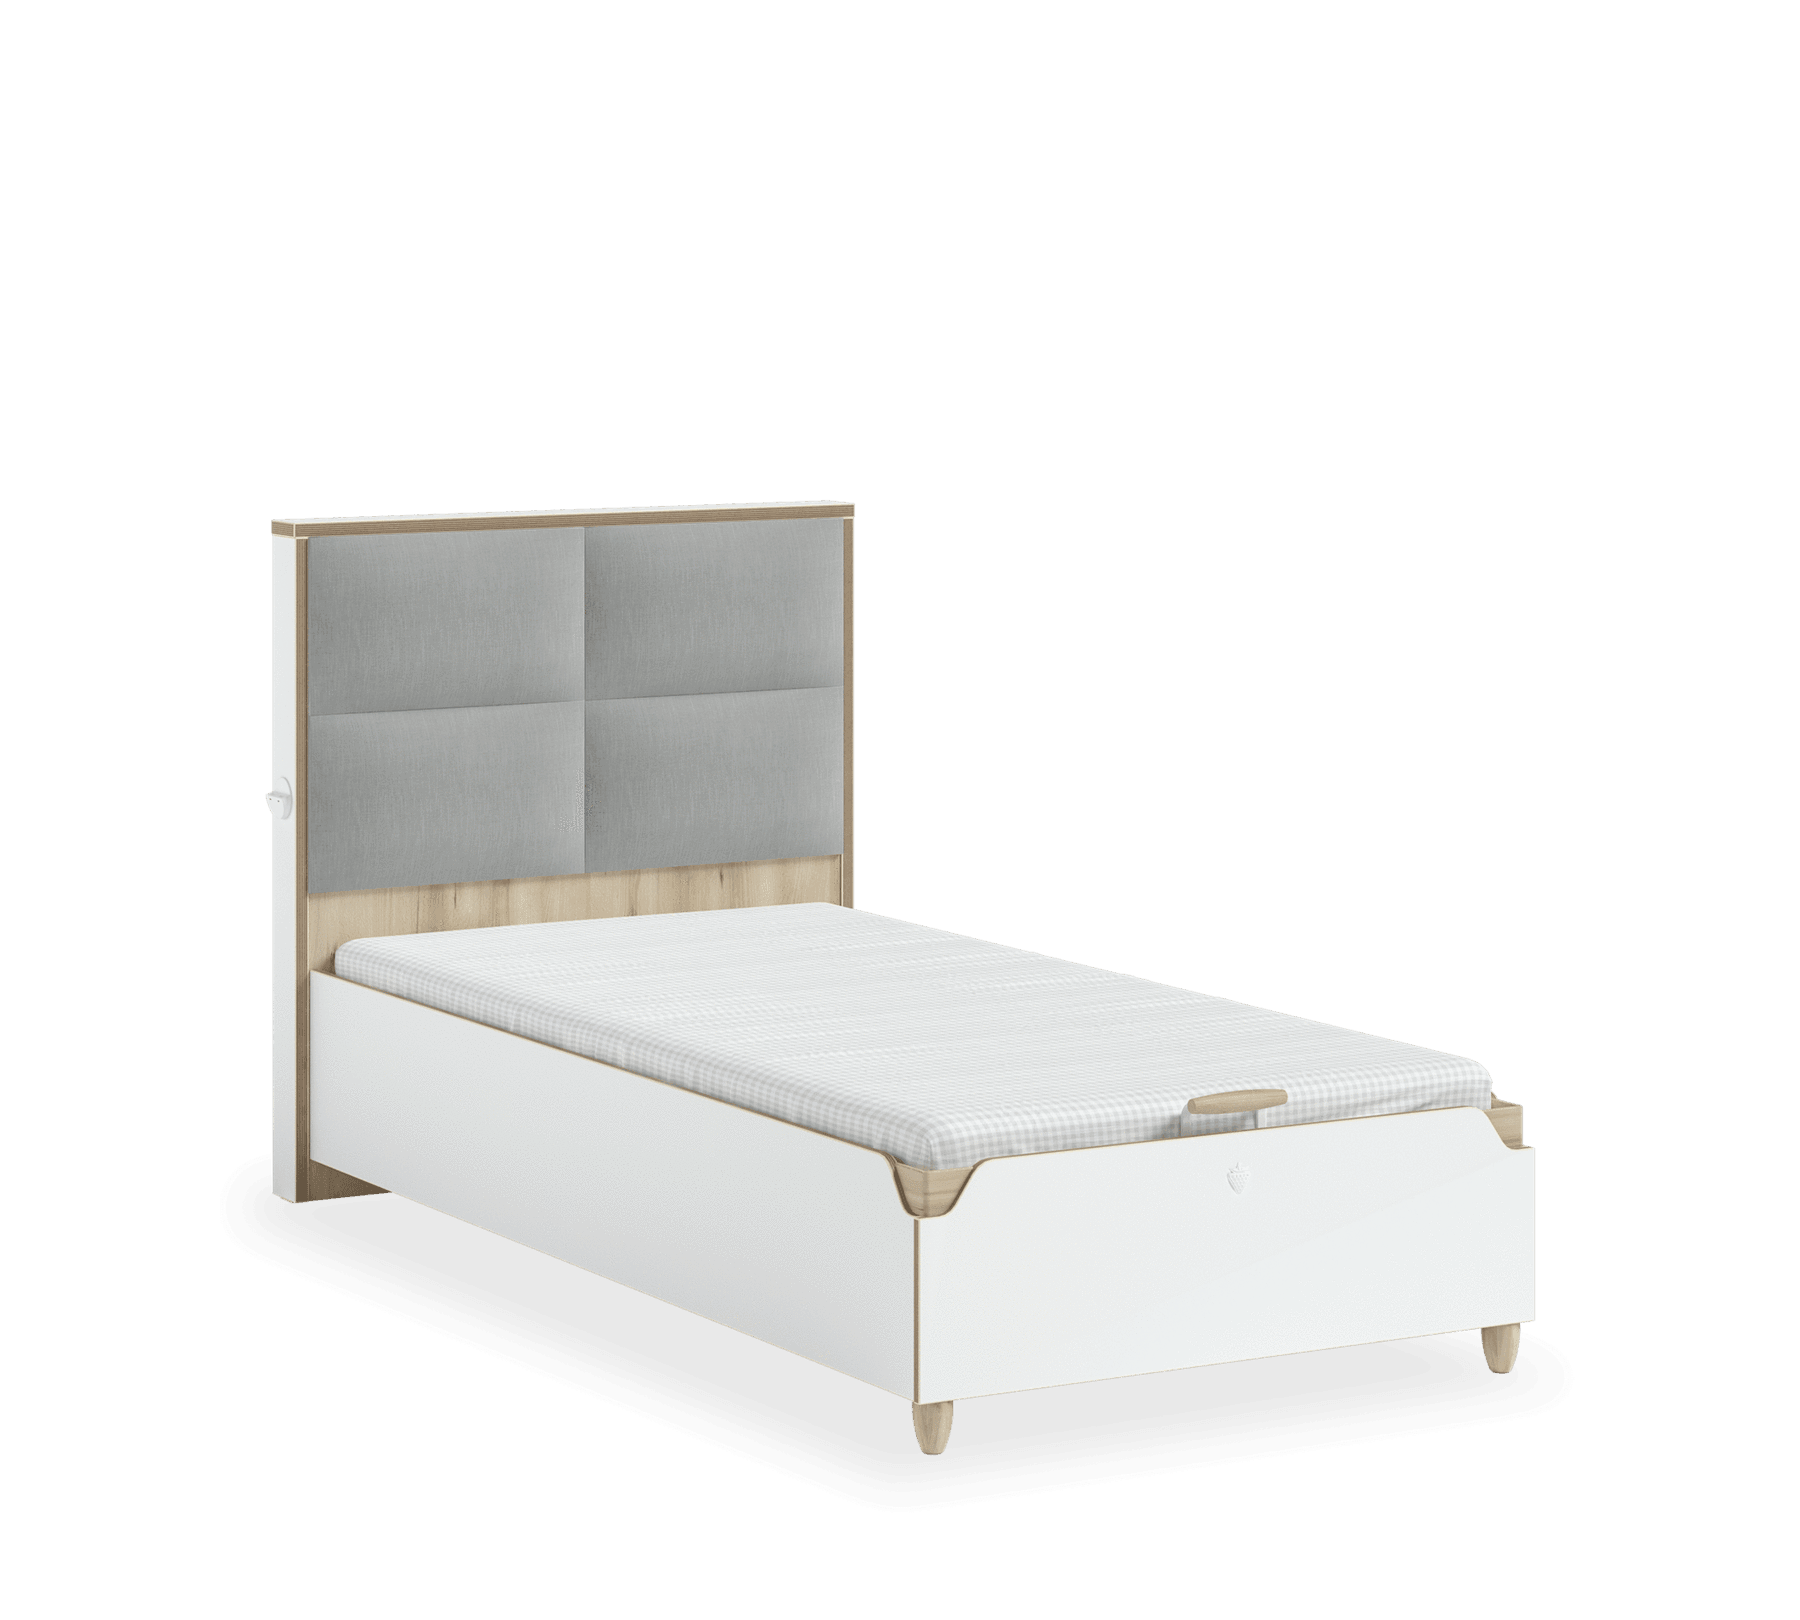 Cilek Modera Fabric Headed Bed With Base (100x200 cm or 120x200 cm) - Kids Haven